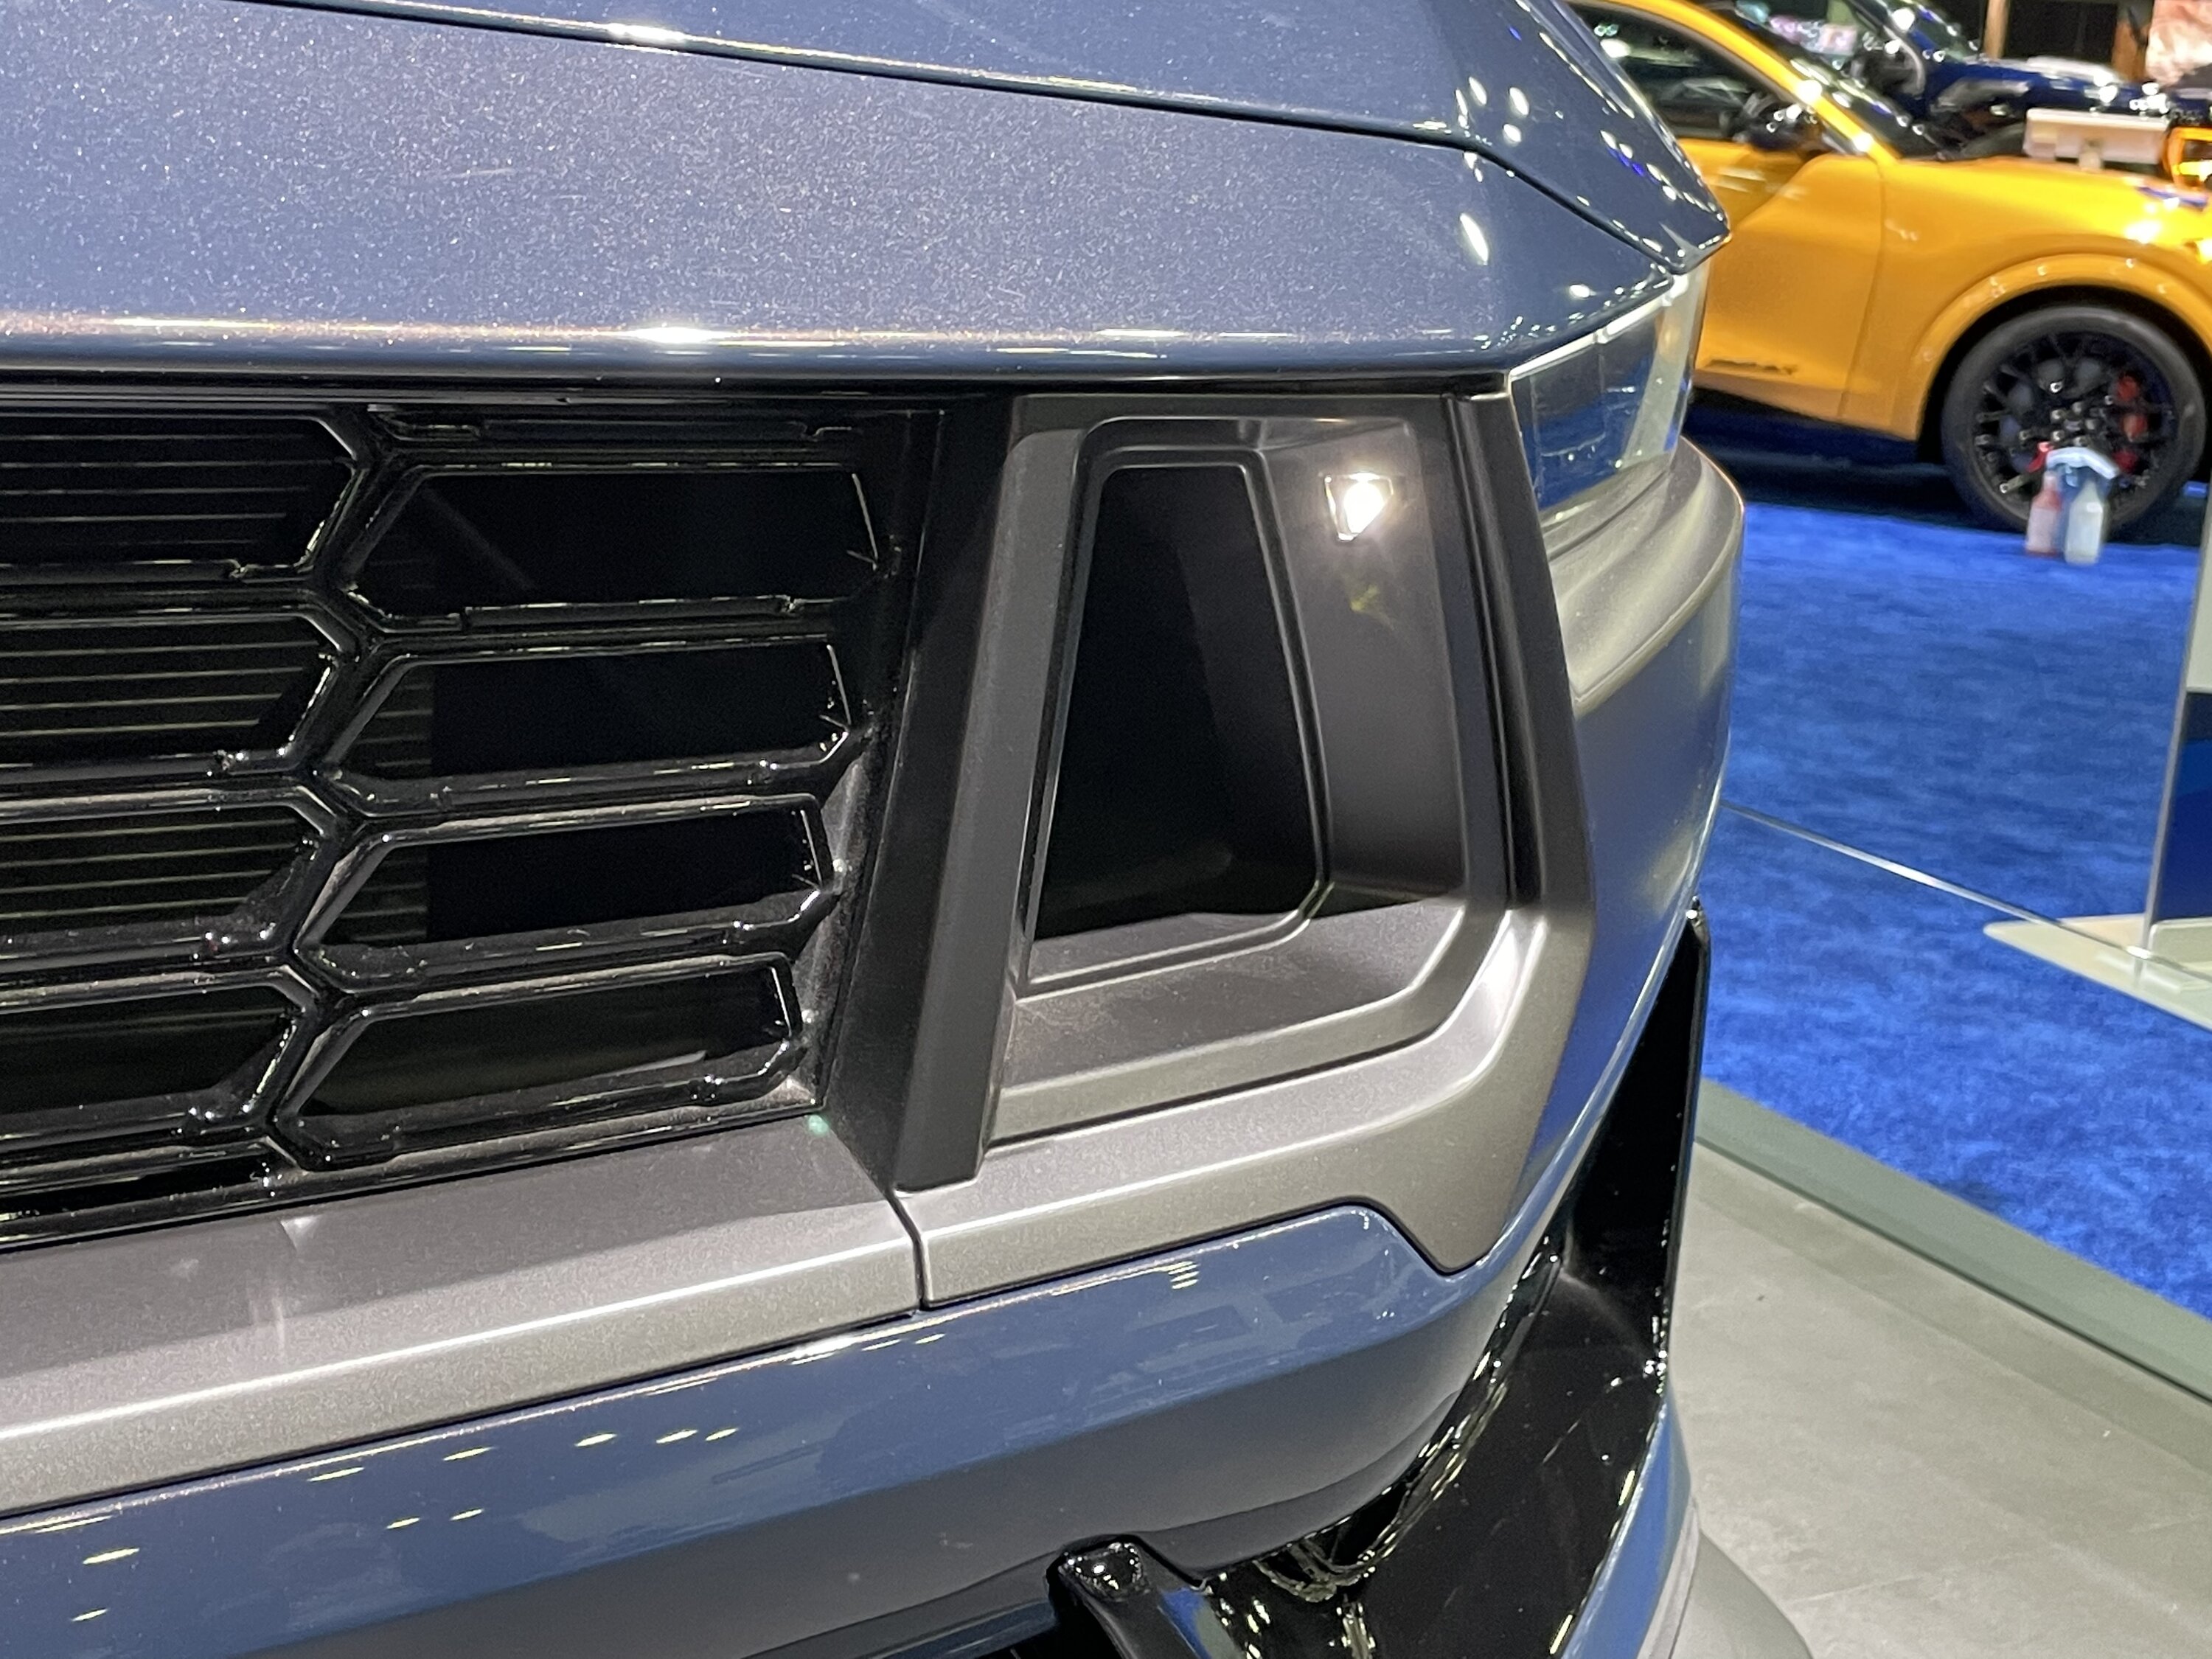 S650 Mustang S650 pics from reveal night and showfloor of 2022 Detroit Auto Show b5f29fd8-e500-4fb6-9d09-12faca7430b1-jpeg-